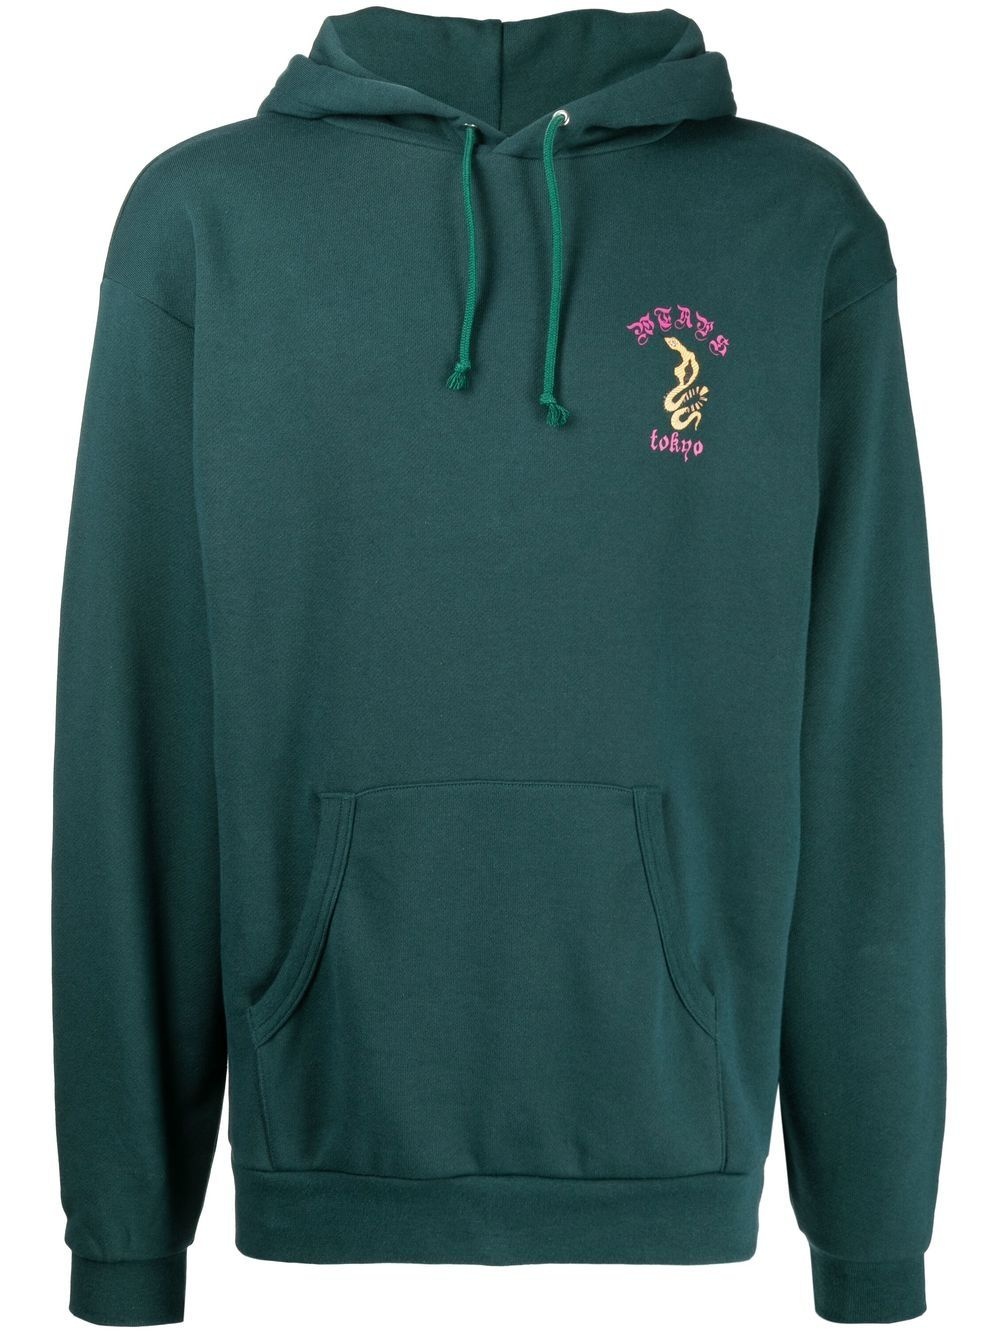 embroidered-logo pullover hoodie - 1